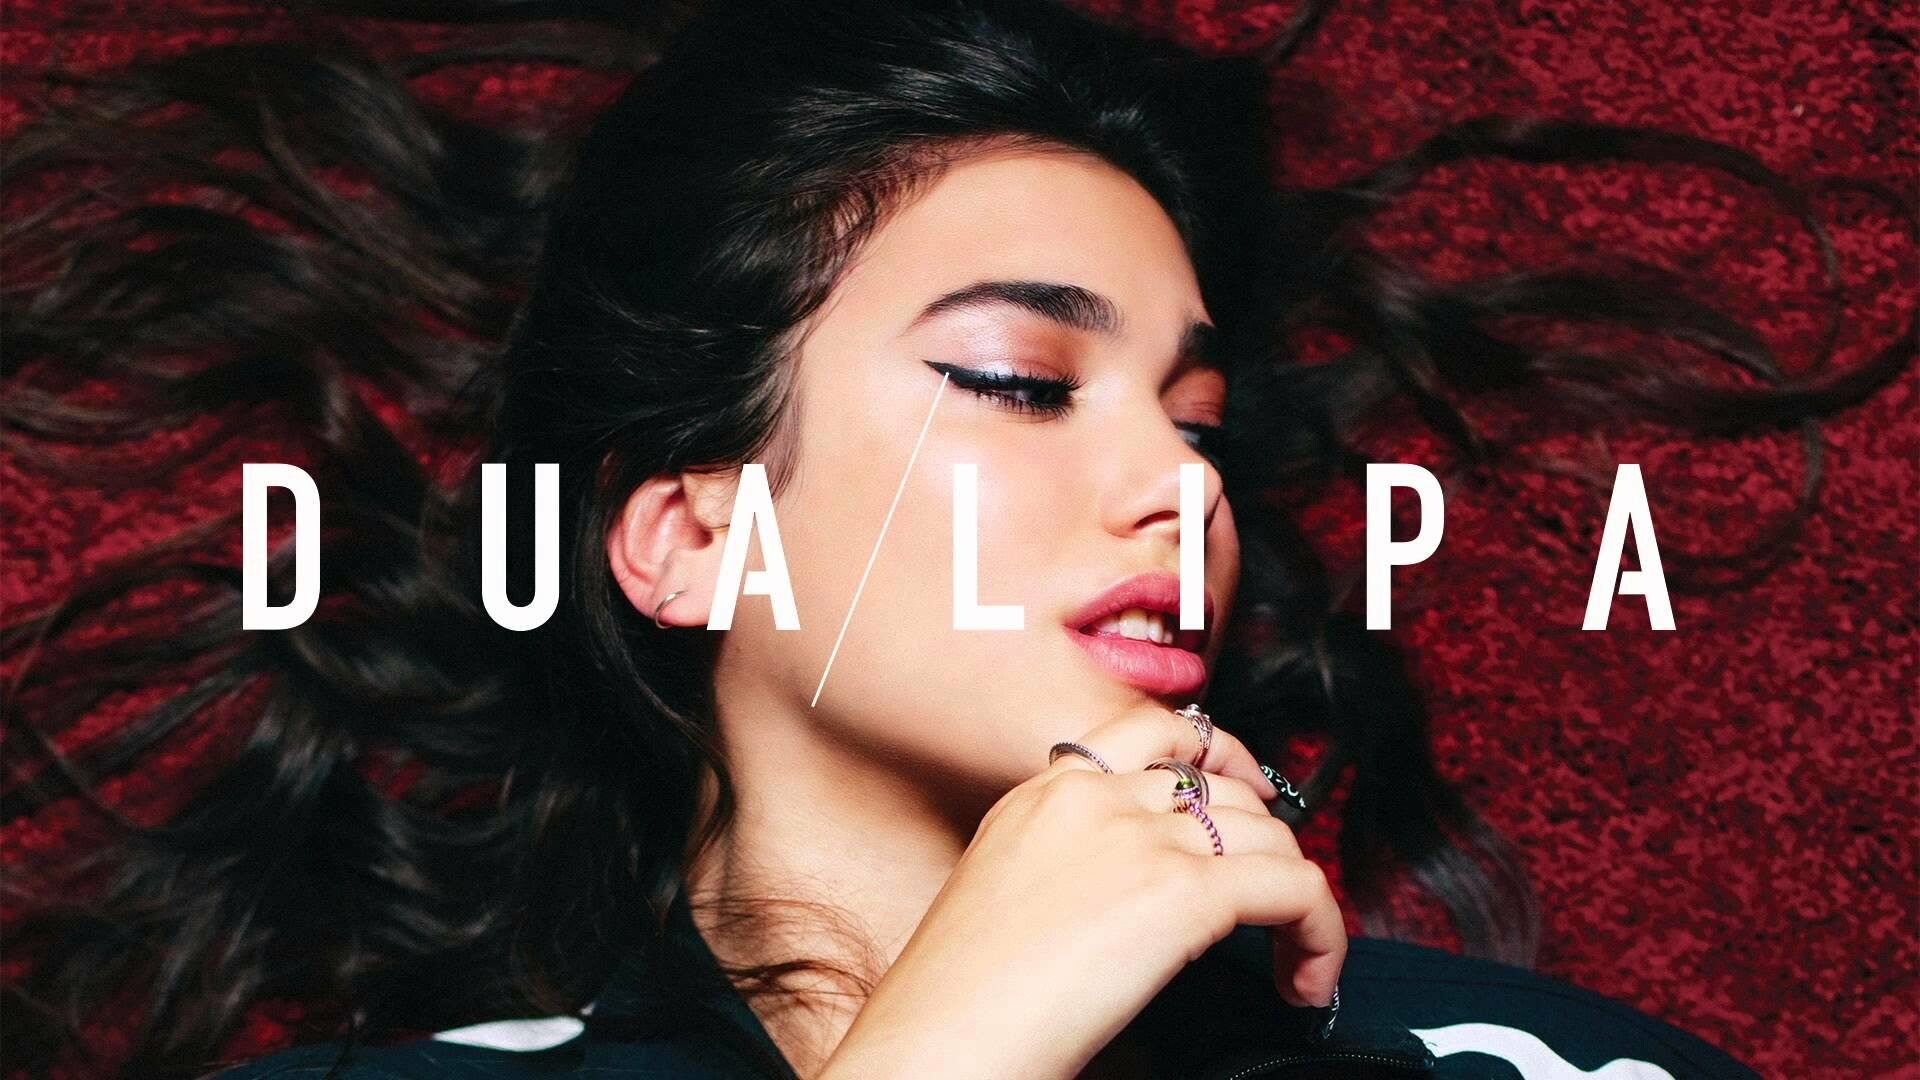 Dua Lipa: Released the single "Swan Song" as part of the soundtrack to the 2019 film Alita: Battle Angel. 1920x1080 Full HD Wallpaper.